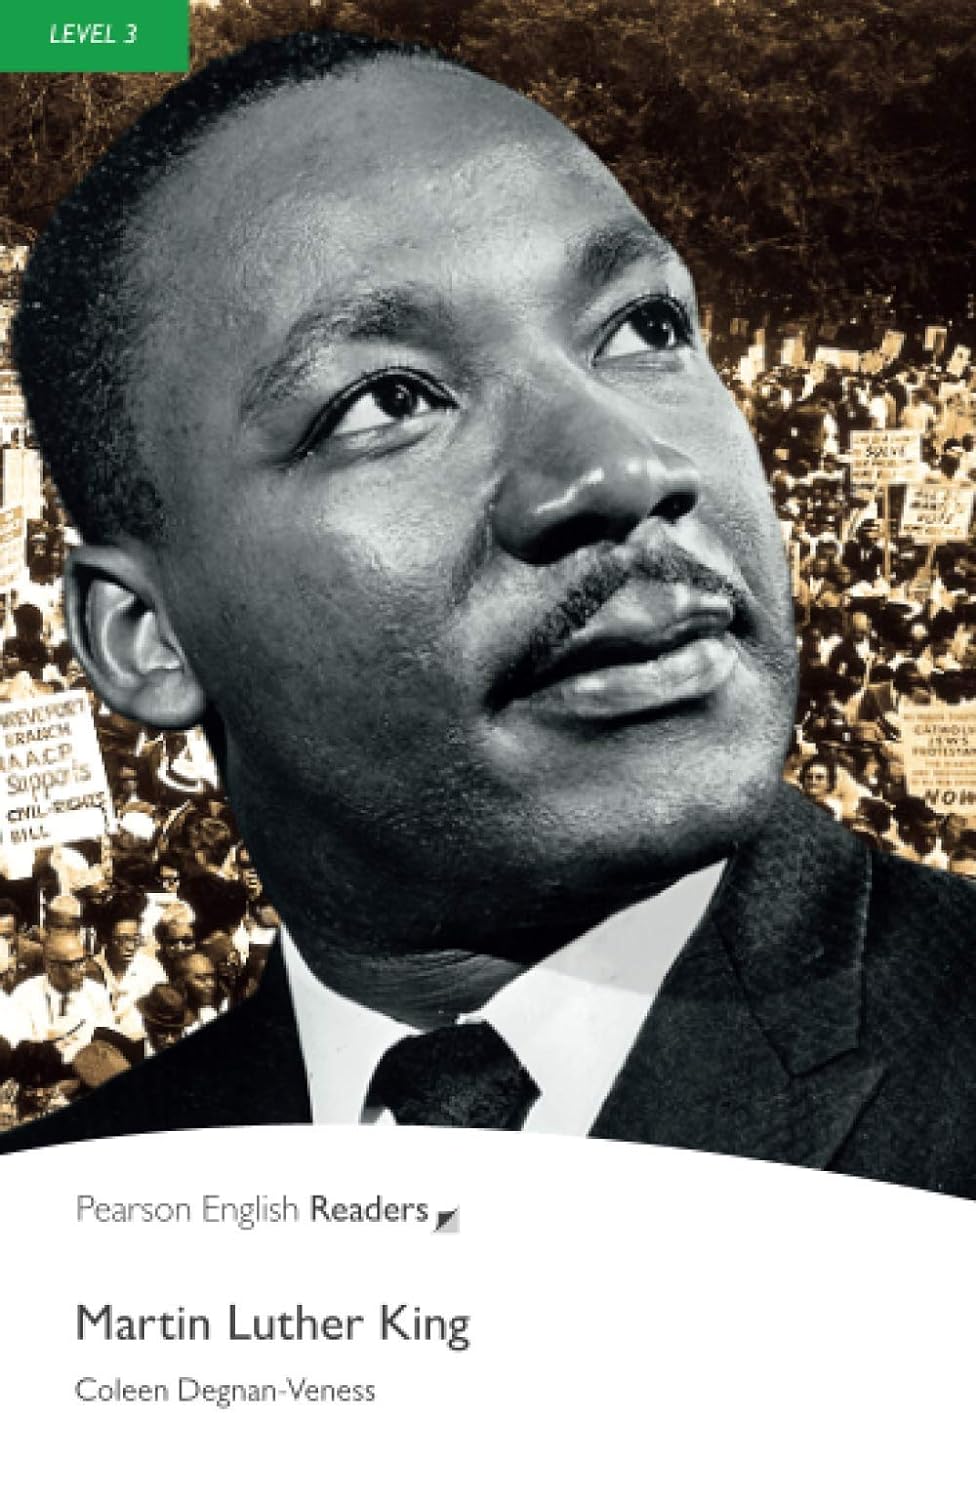 literature_english_readers_cover_martin_luther_king